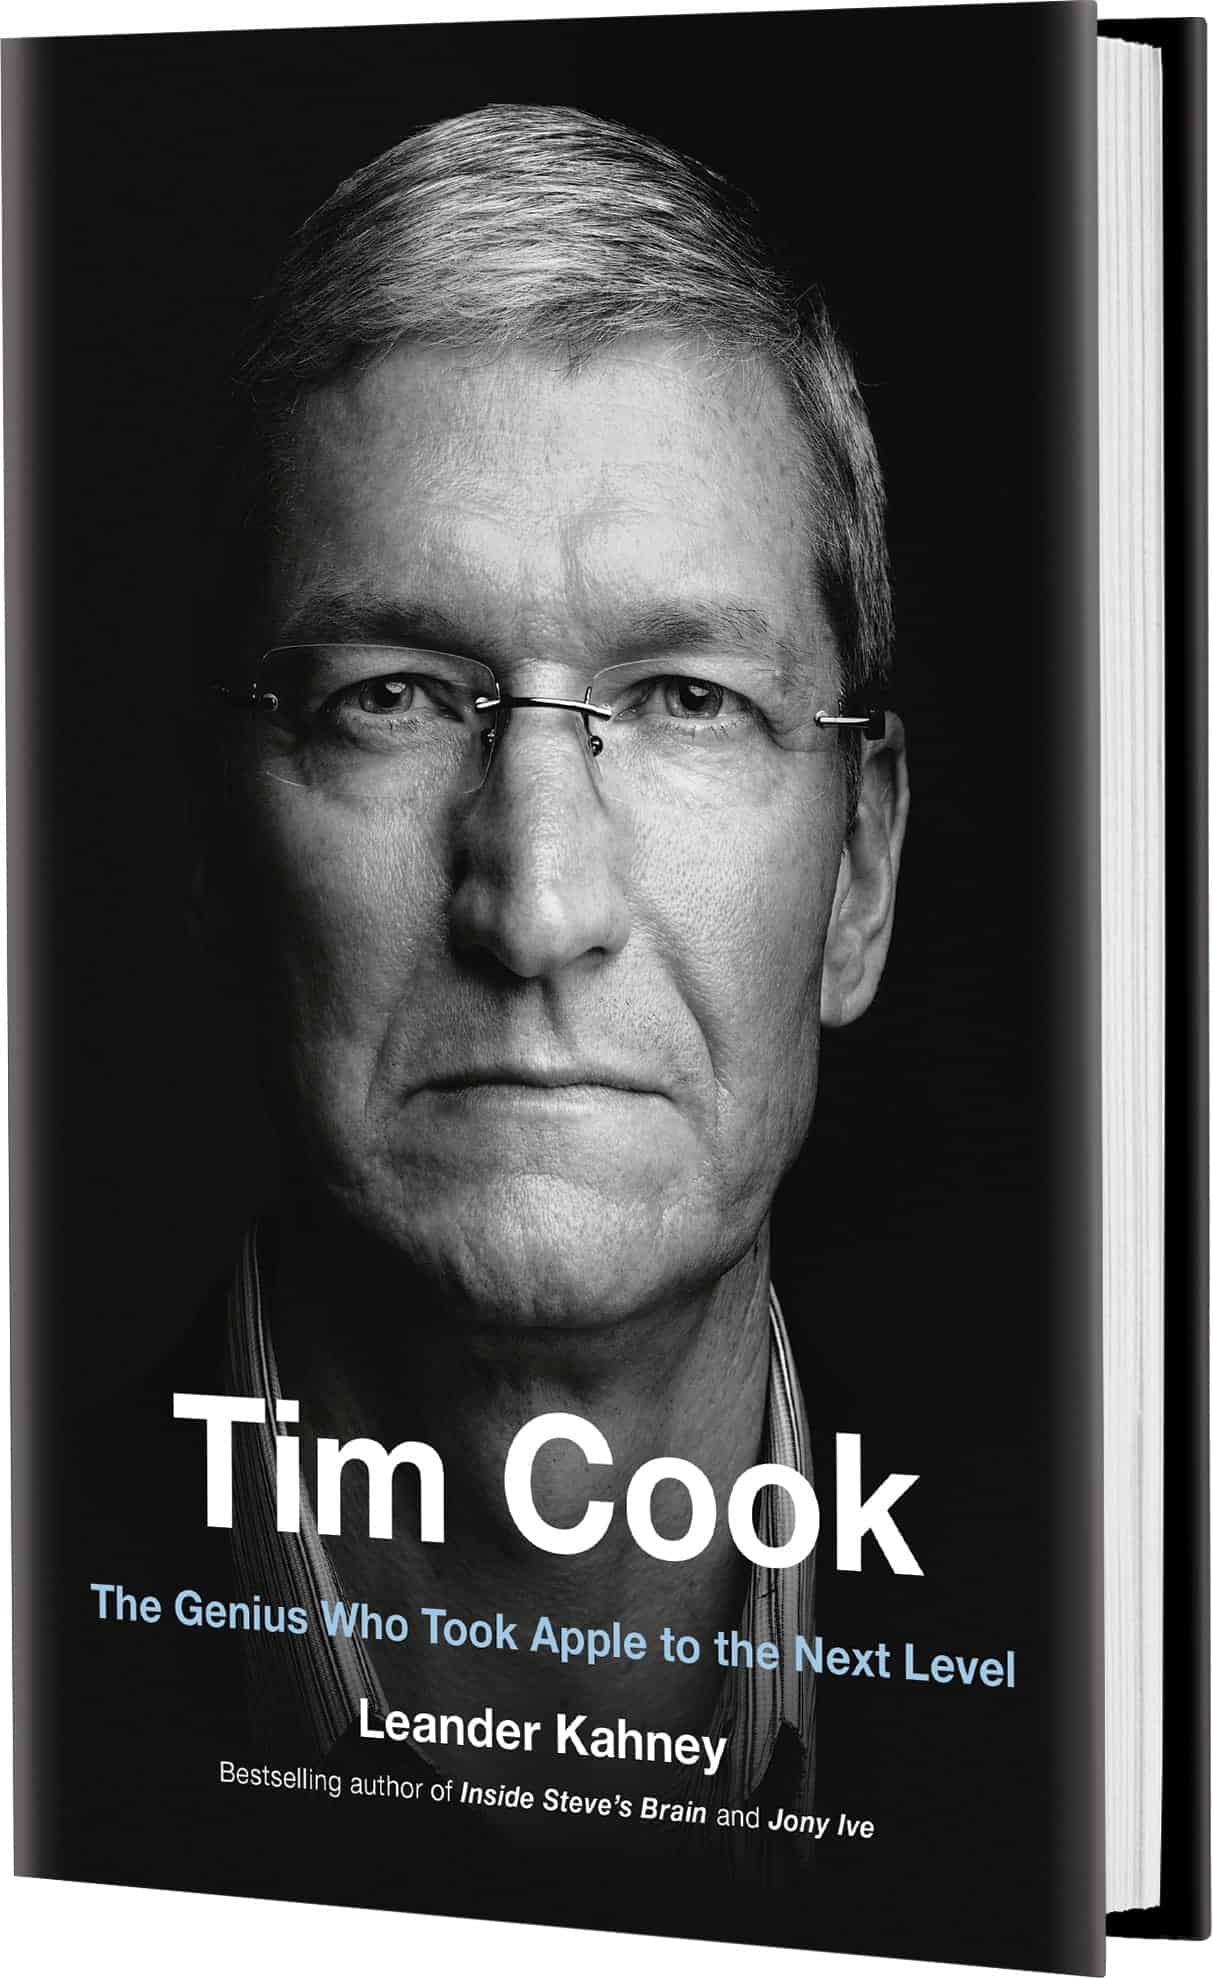 Tim Cook (front cover)